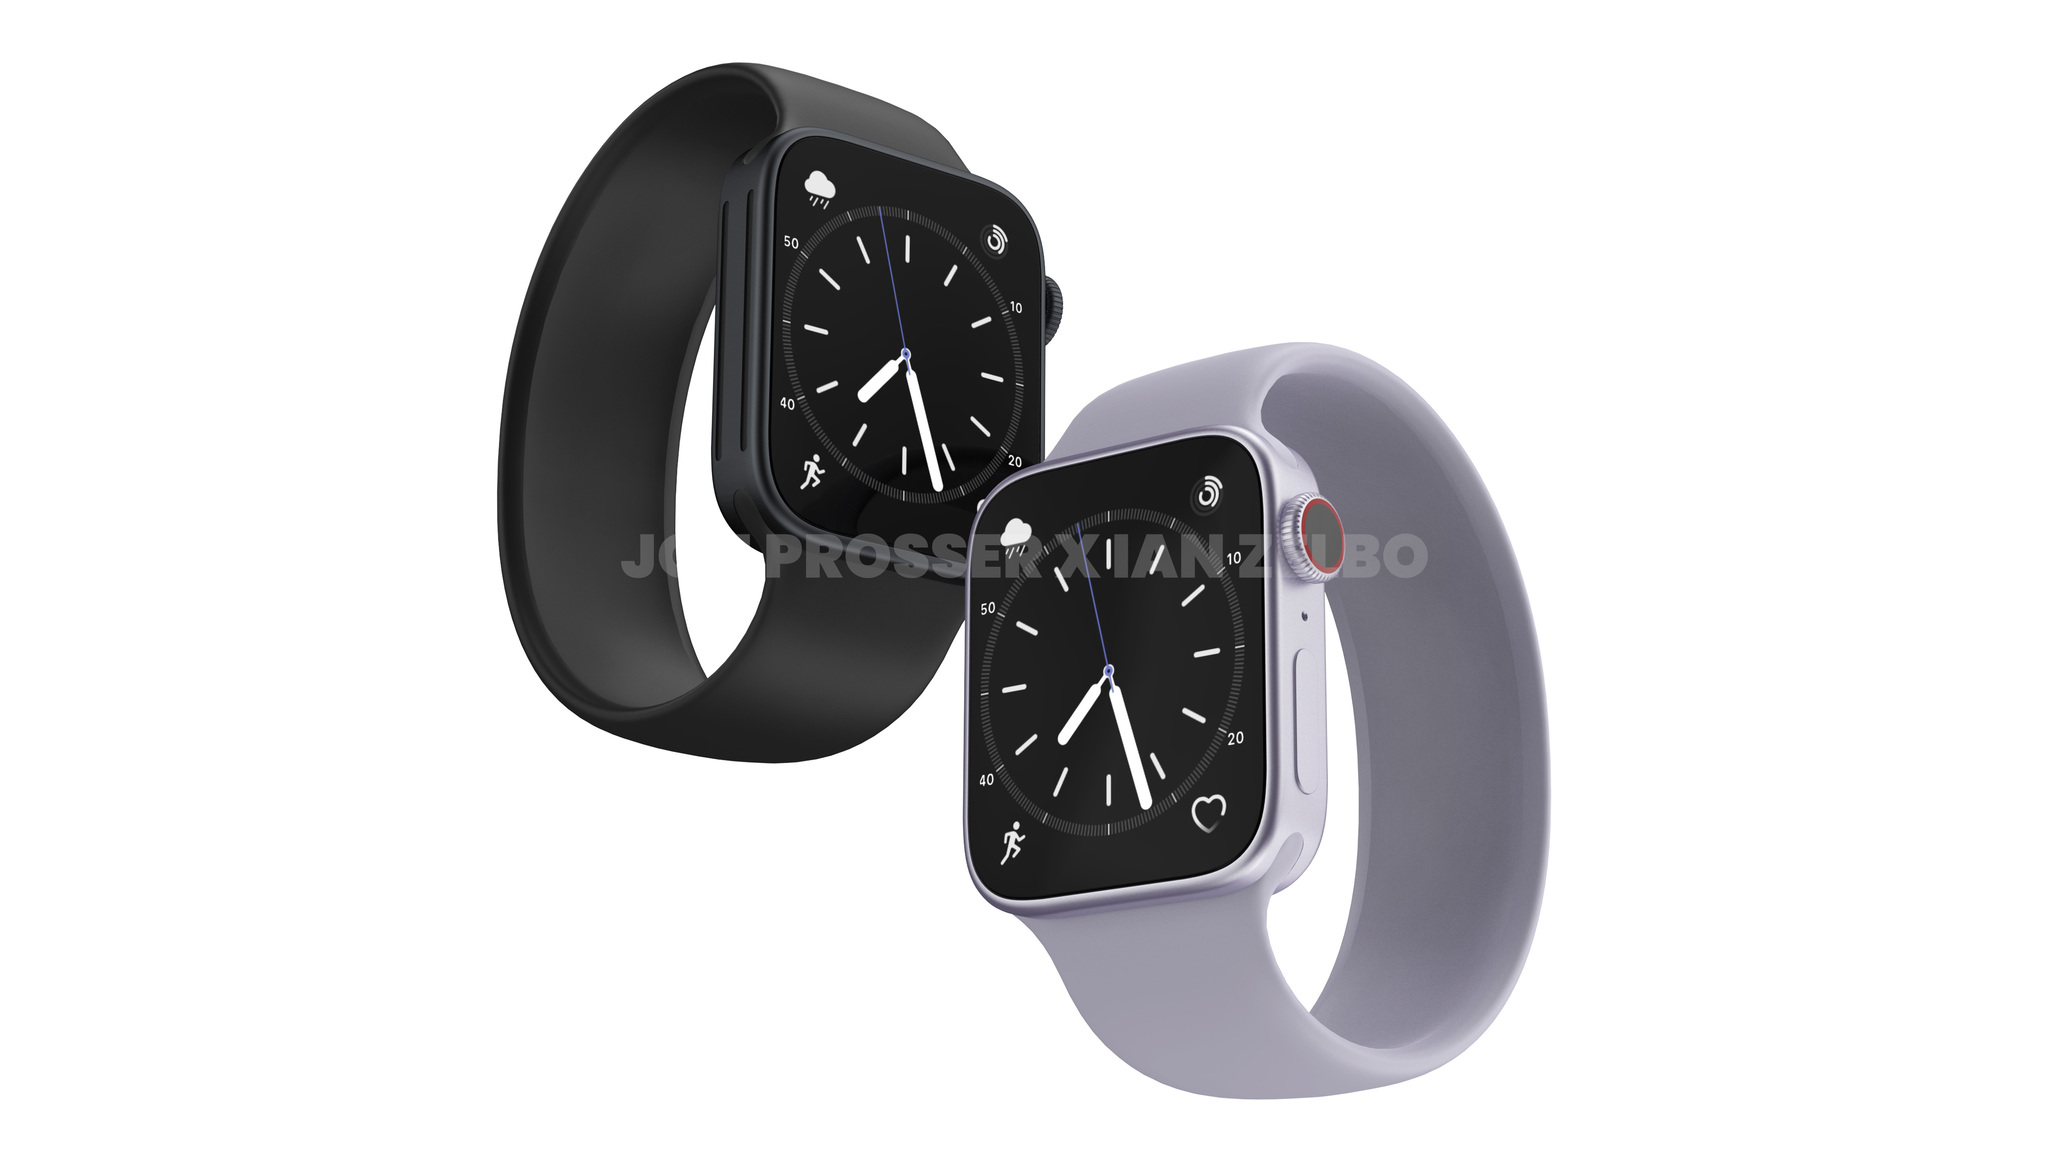 Apple Watch 'Extreme Sports' edition to feature larger display, battery | iMore